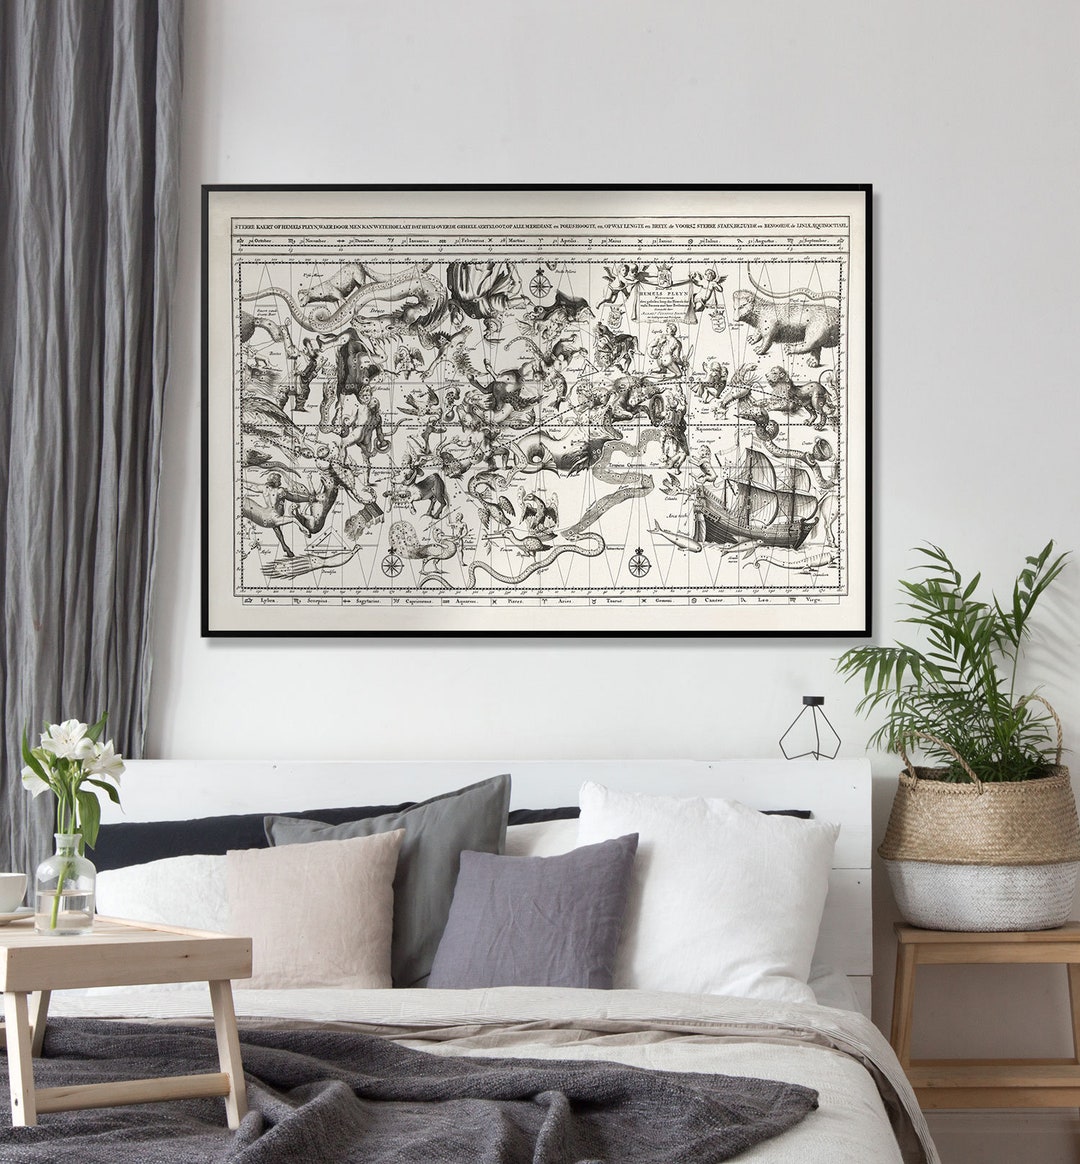 Black and White Vintage Star Map Print With Zodiac - Etsy